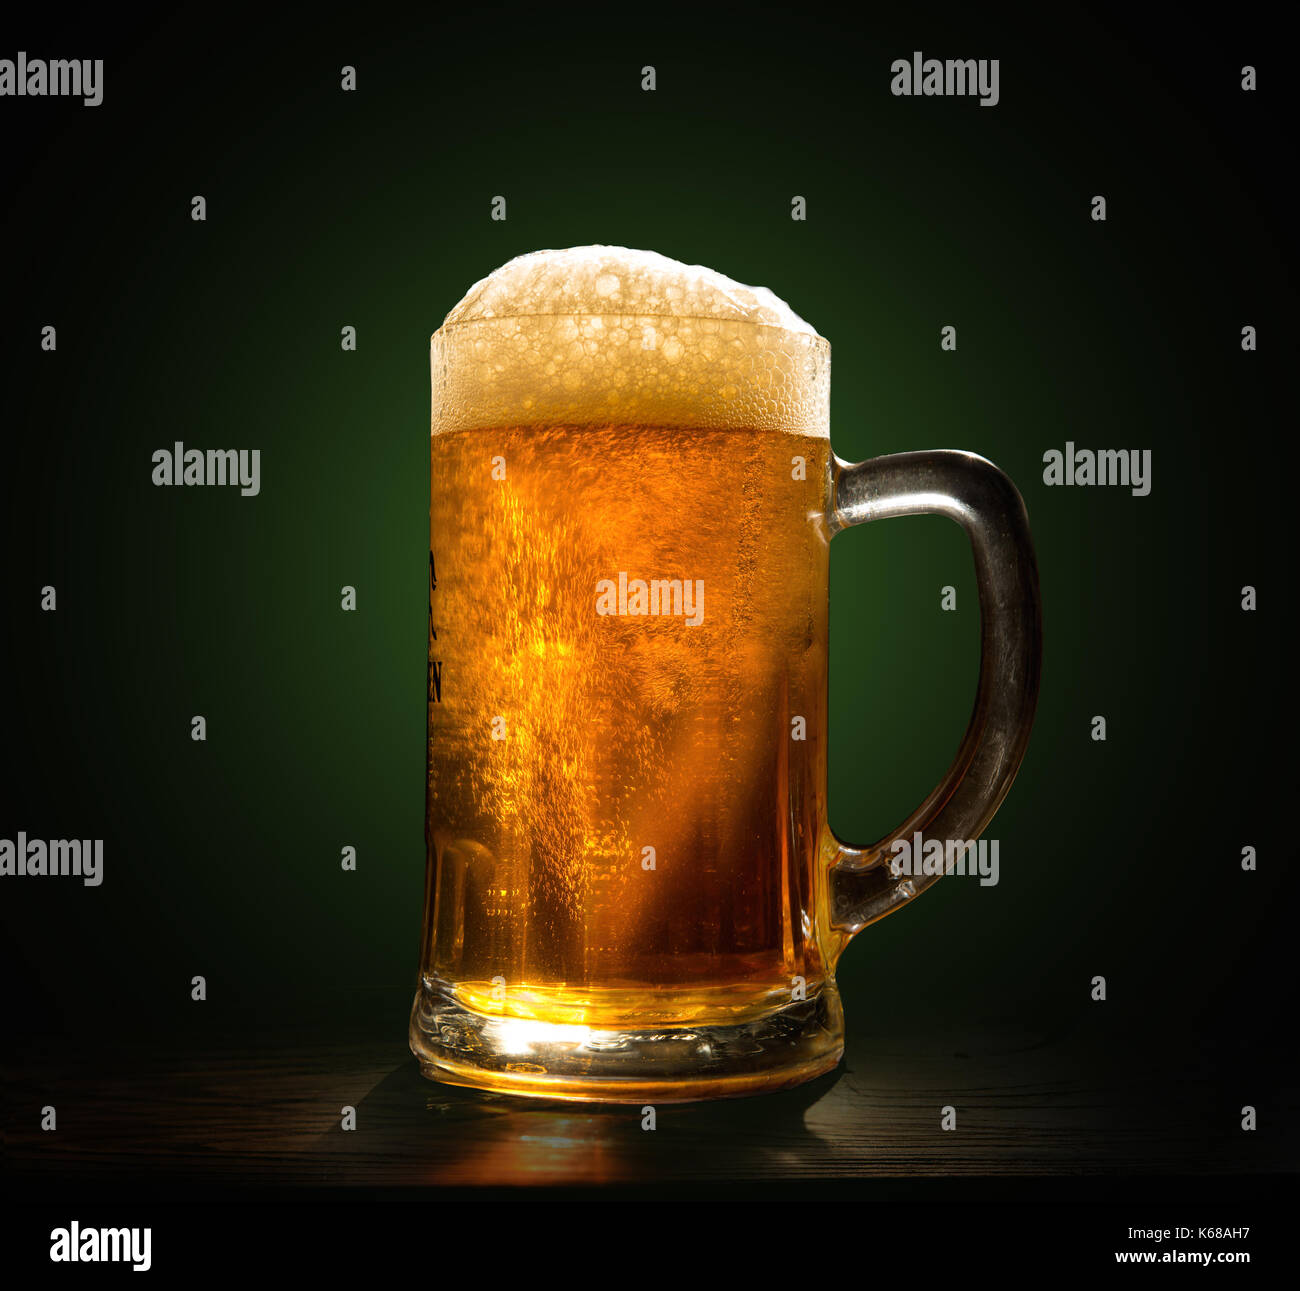 A glass of fresh, cold beer close-up on a black background Stock Photo